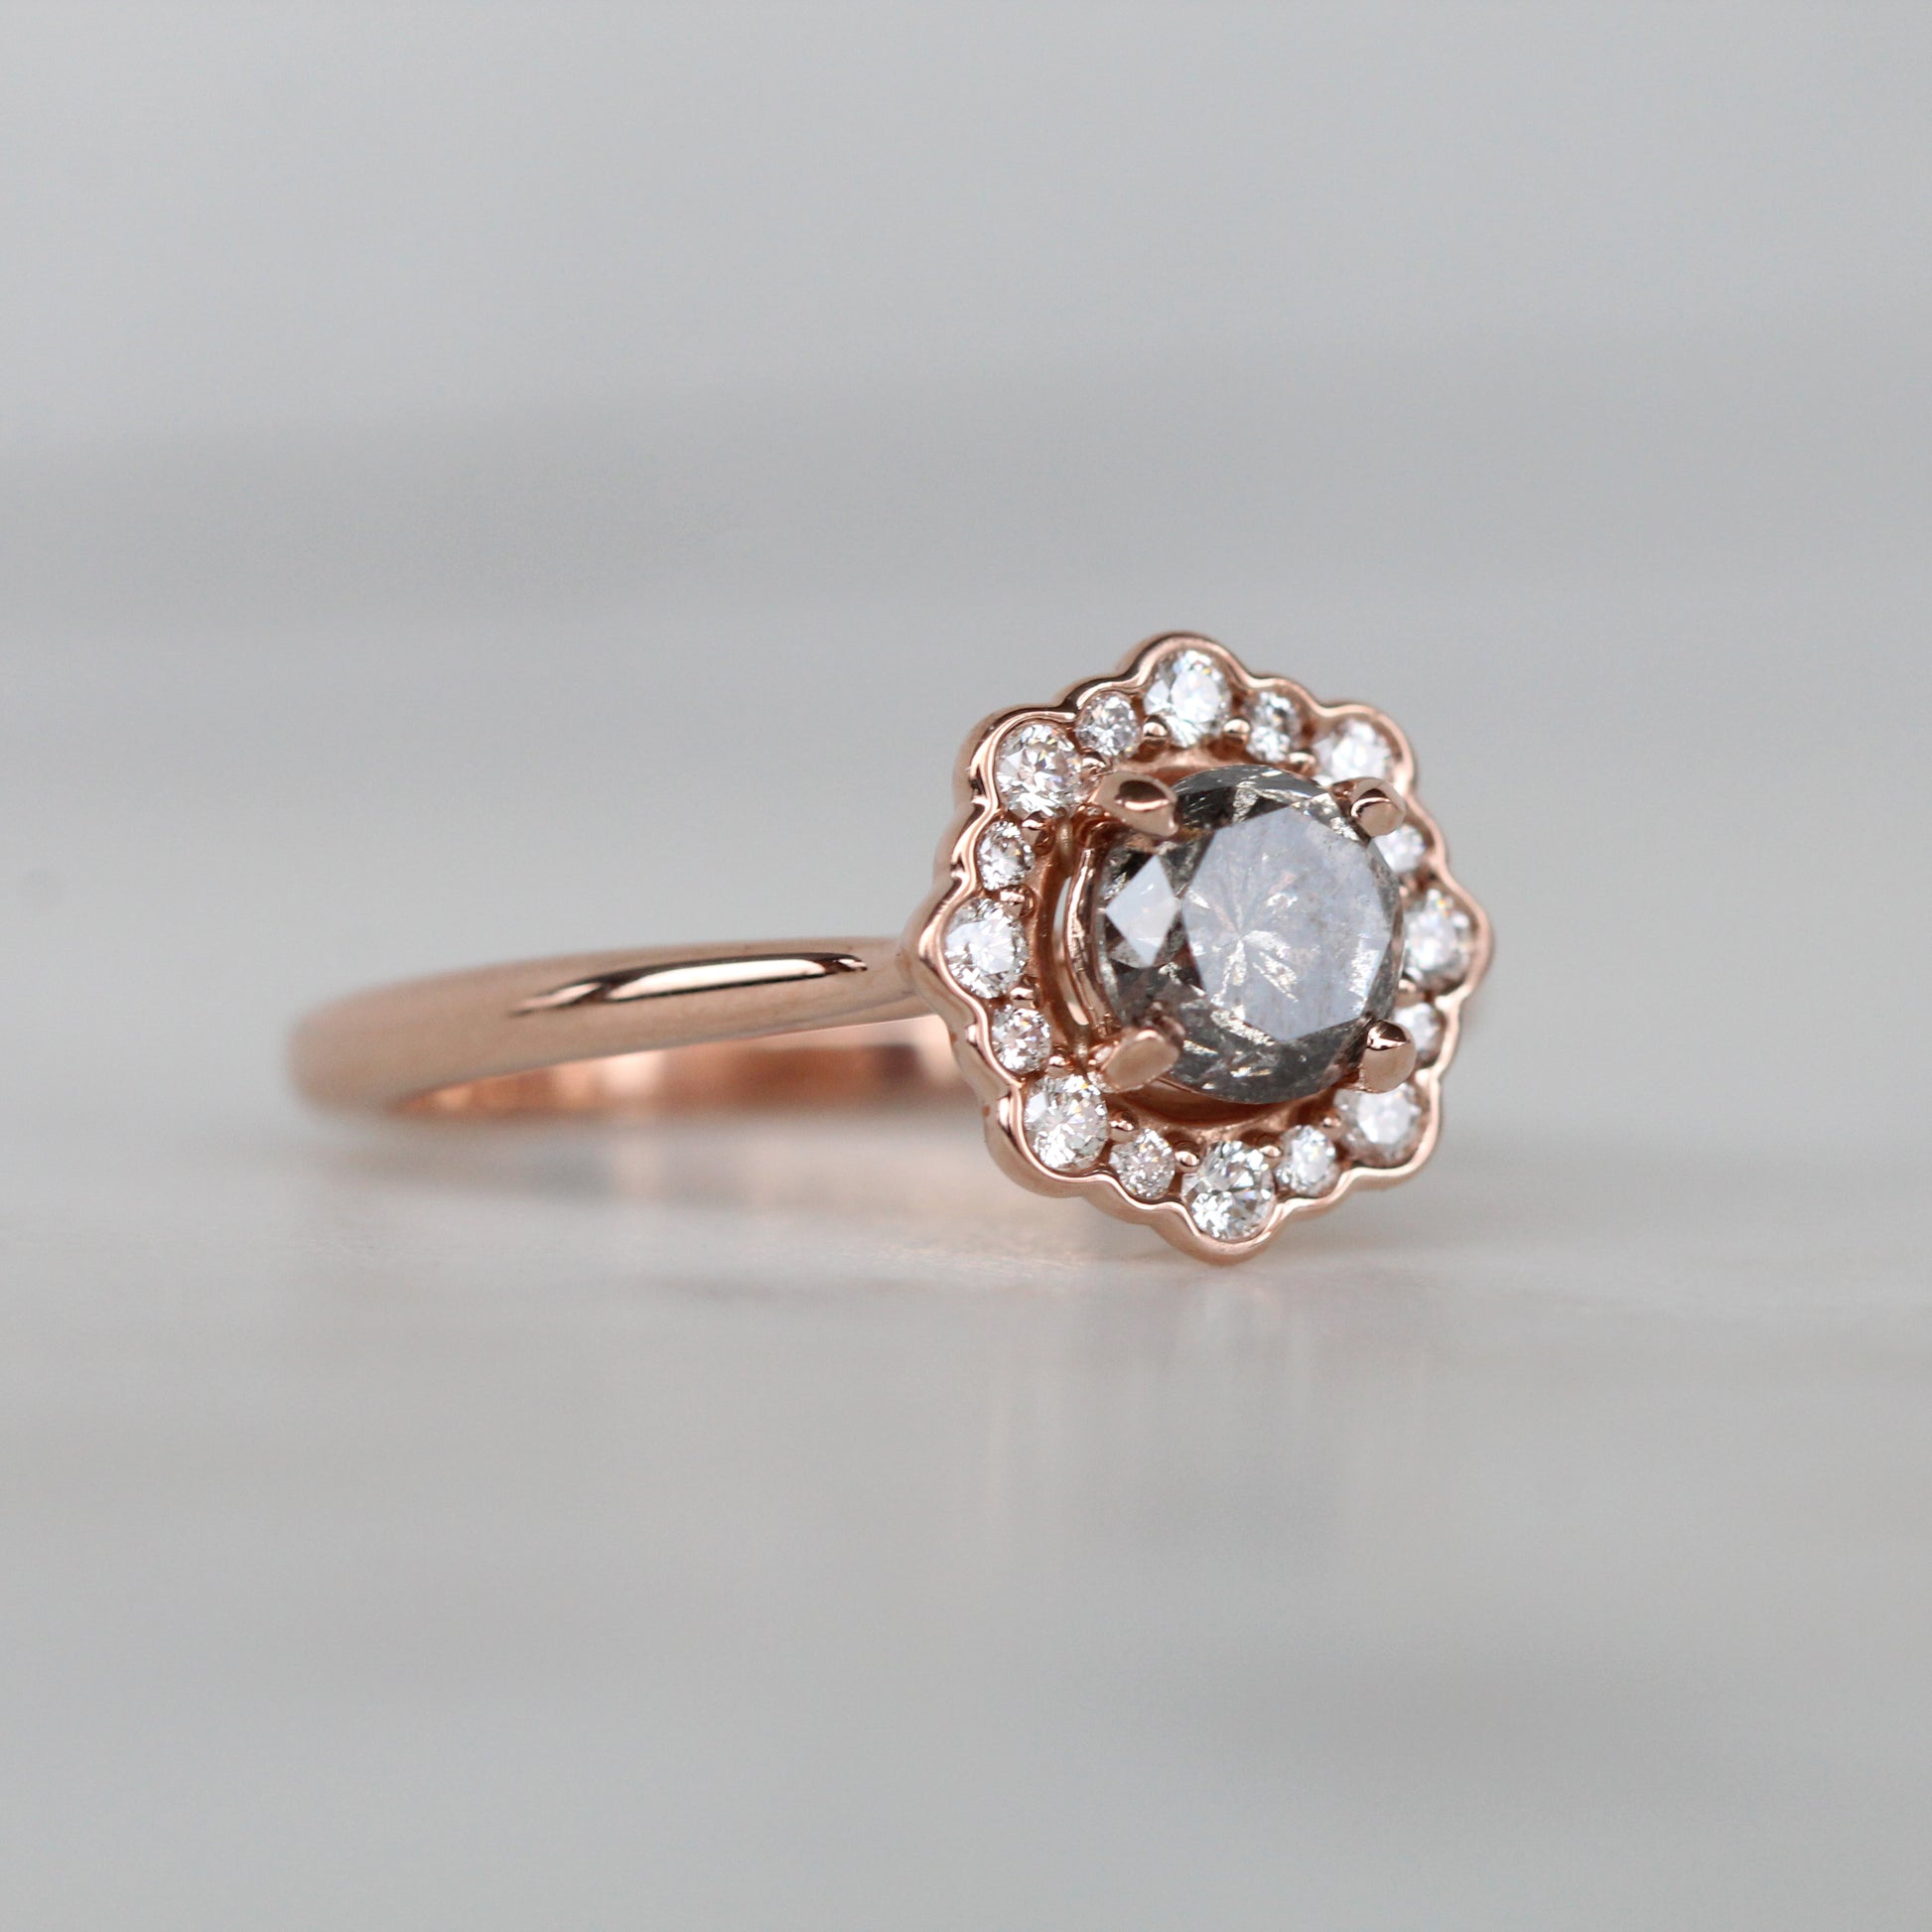 Daisy Ring with a 0.96 Carat Celestial Diamond and White Diamond Halo in 14k Rose Gold - Ready to Size and Ship - Midwinter Co. Alternative Bridal Rings and Modern Fine Jewelry